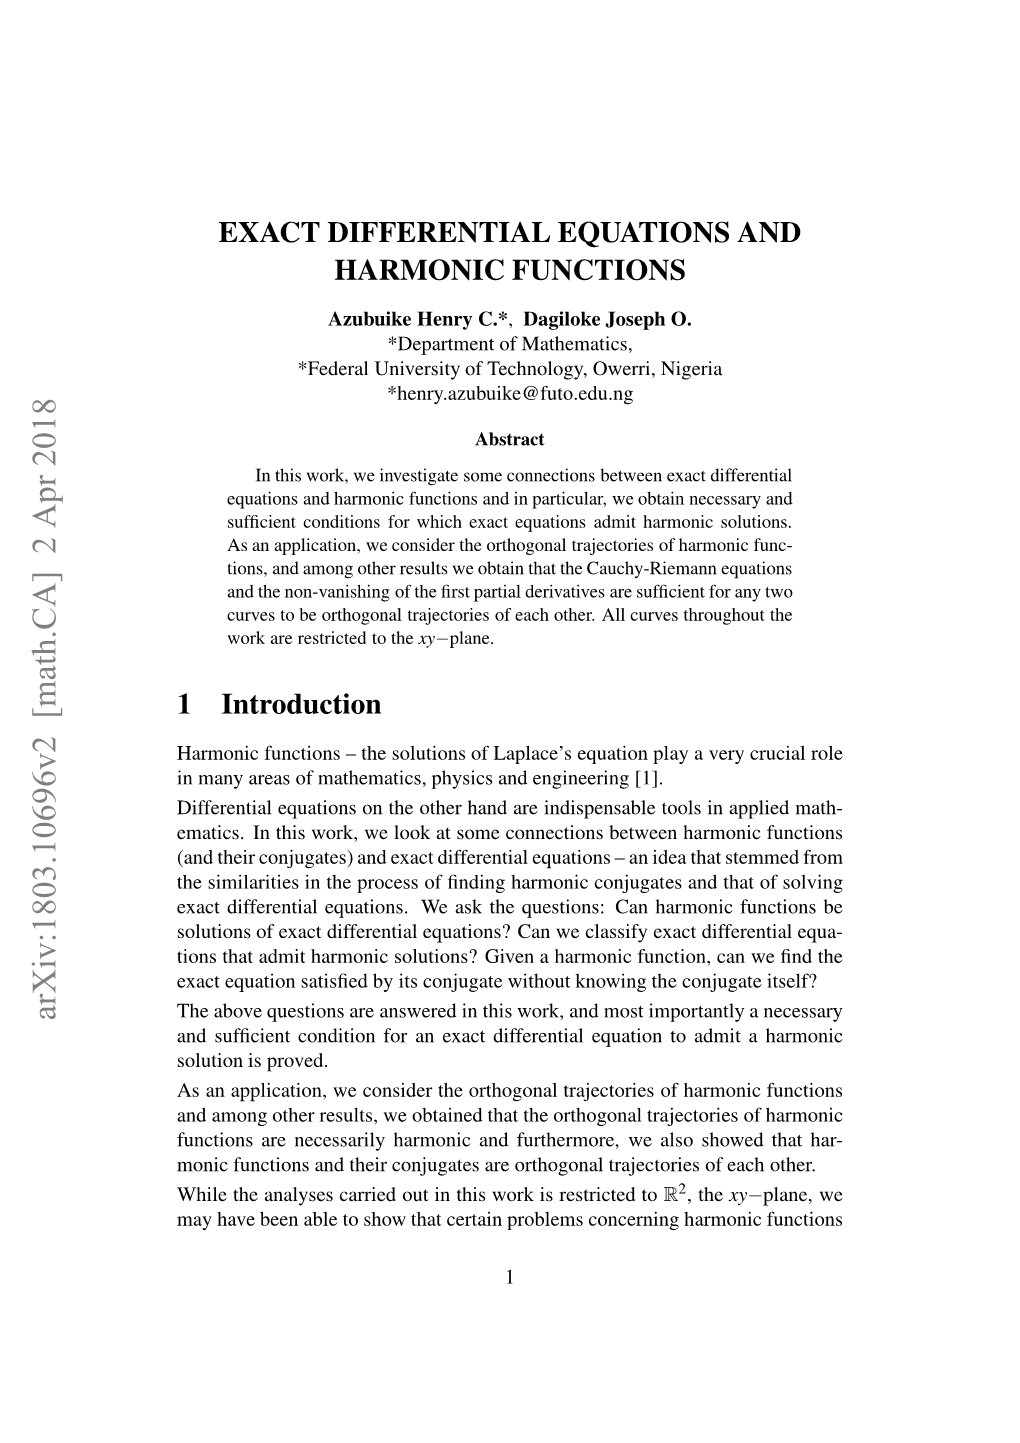 Exact Differential Equations and Harmonic Functions